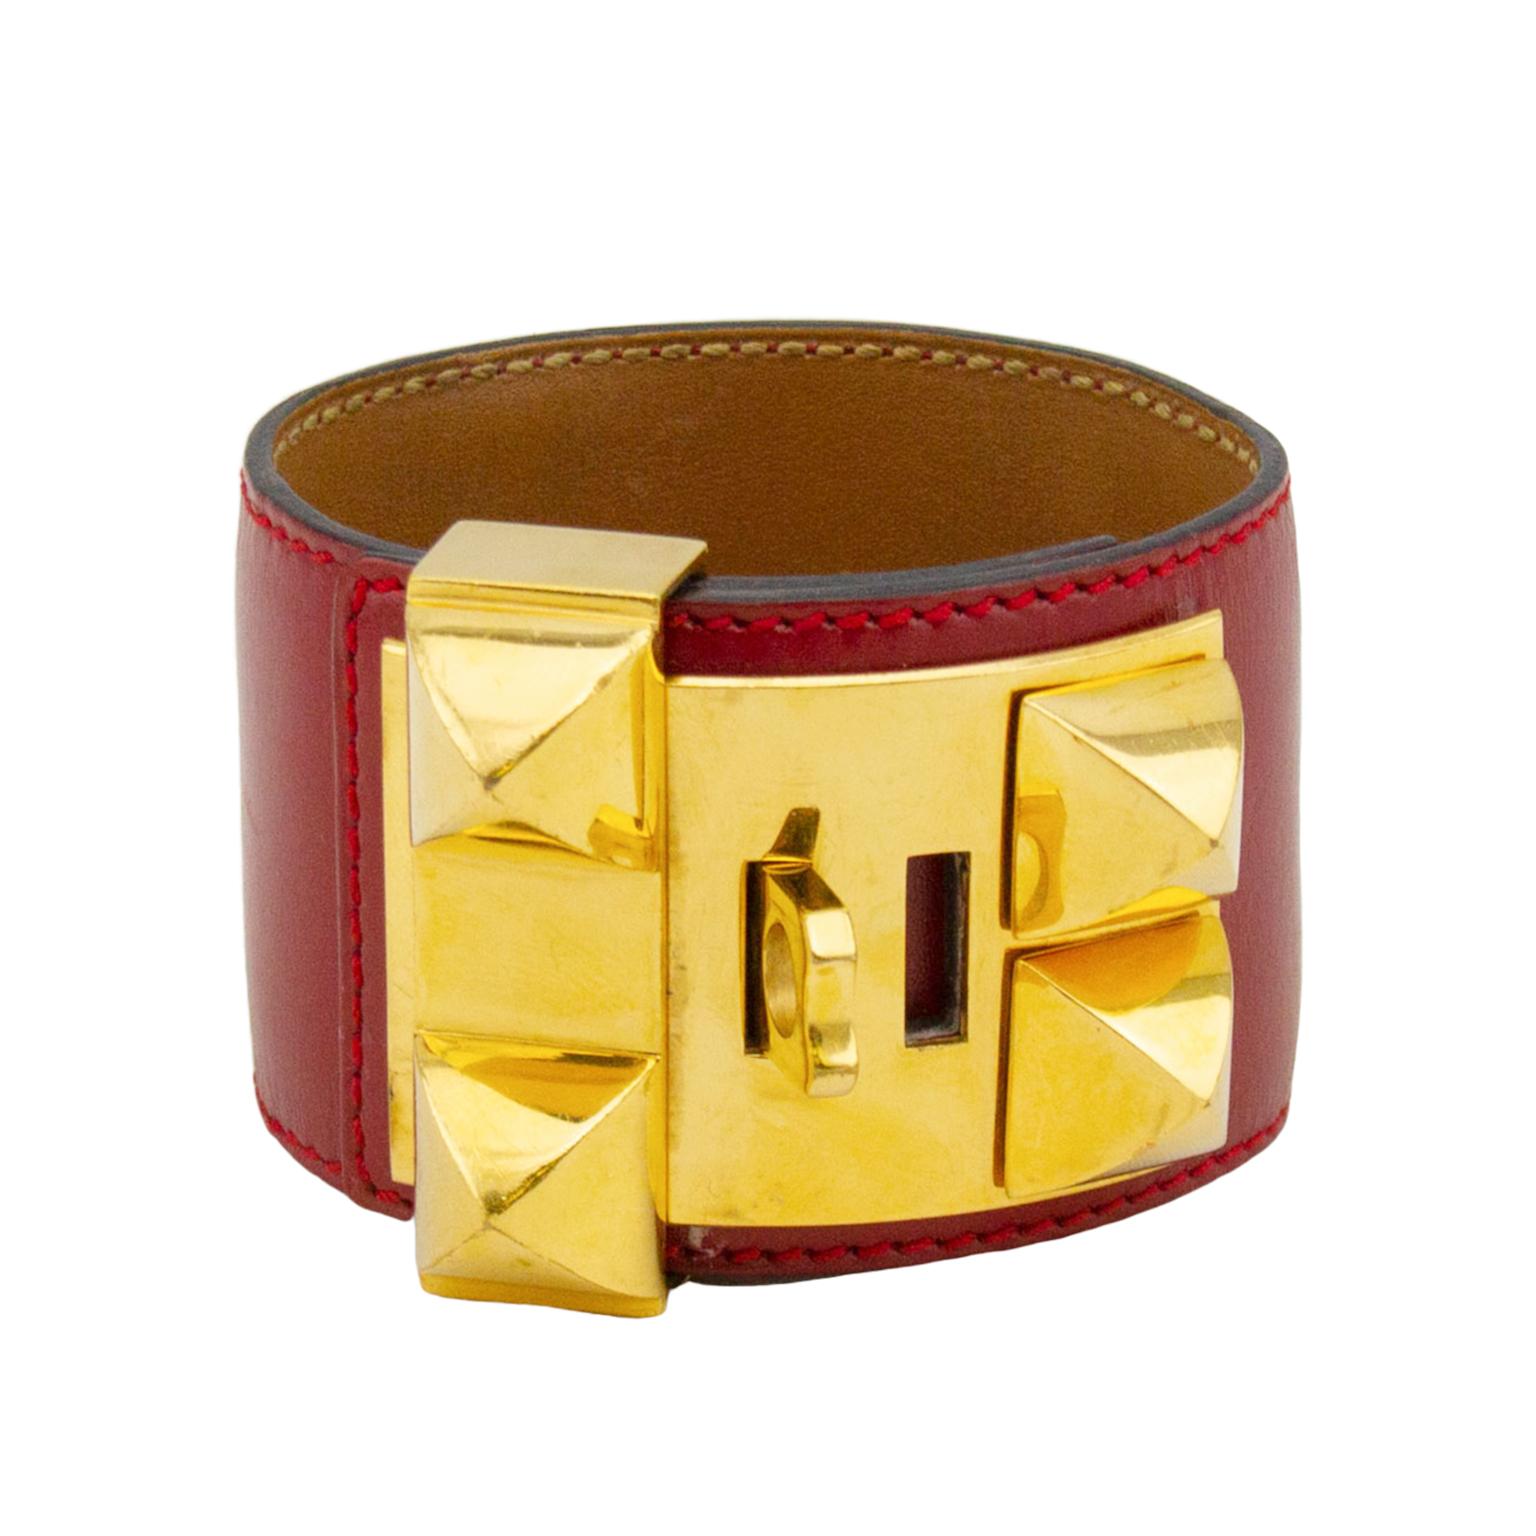 Classic and ever so collectable, the Hermes Collier de Chien bracelet cuff is a must have piece of jewelry. This red box leather cuff has gold tone hardware and can be adjusted to 4 different settings. The underside of the bracelet is a rich brown